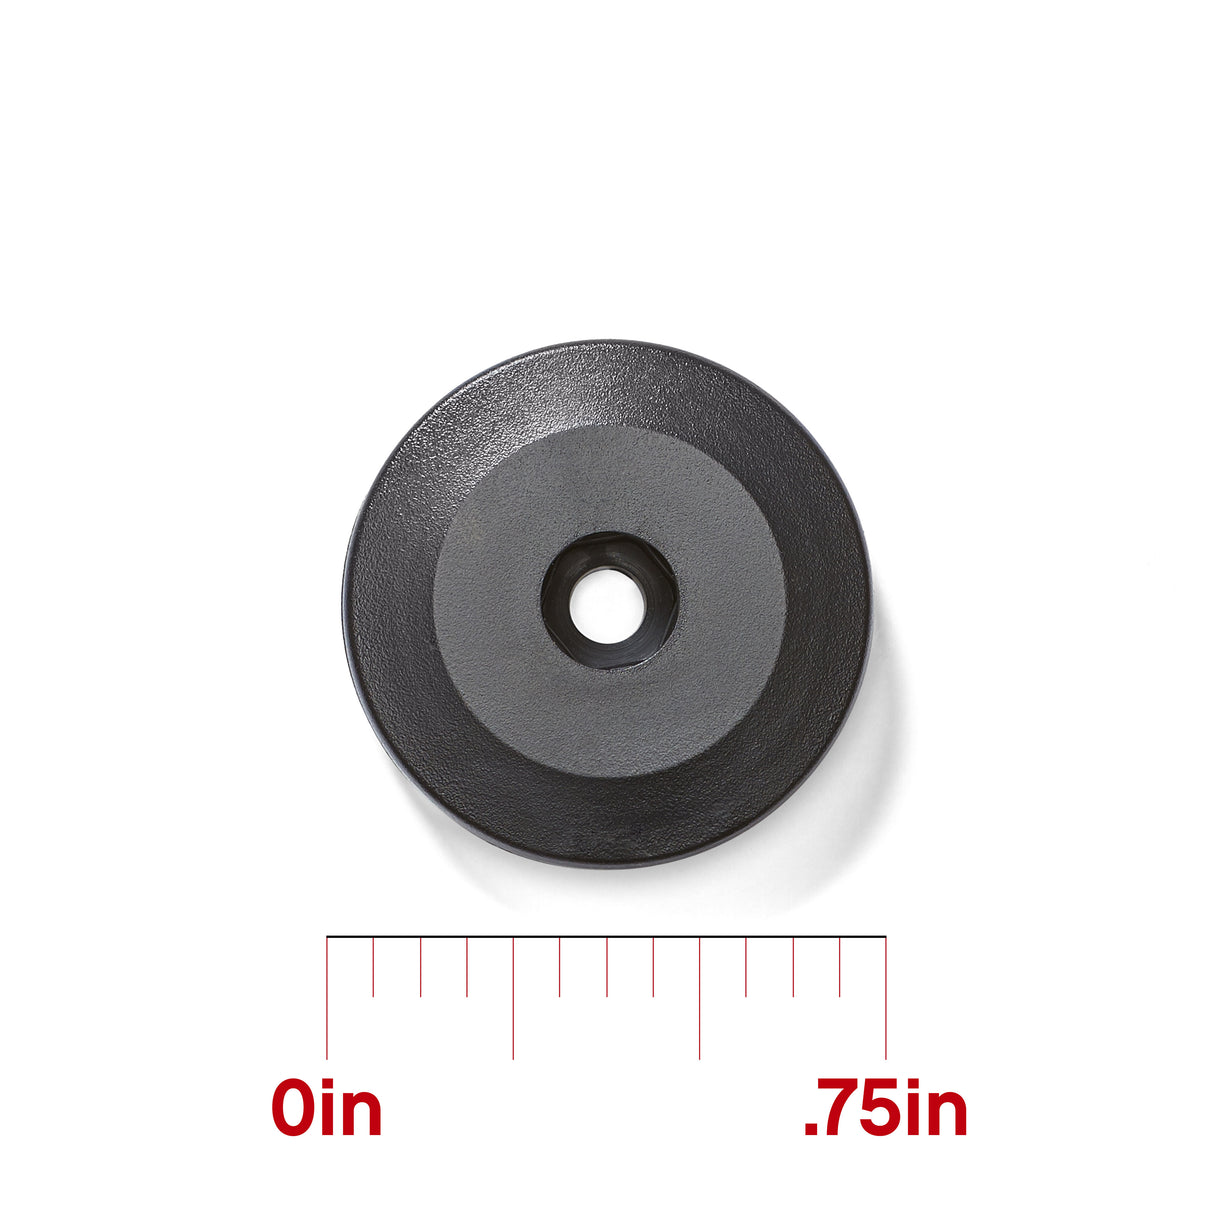 Swivel Disc for fender holder rail mount TFR-404, with scale